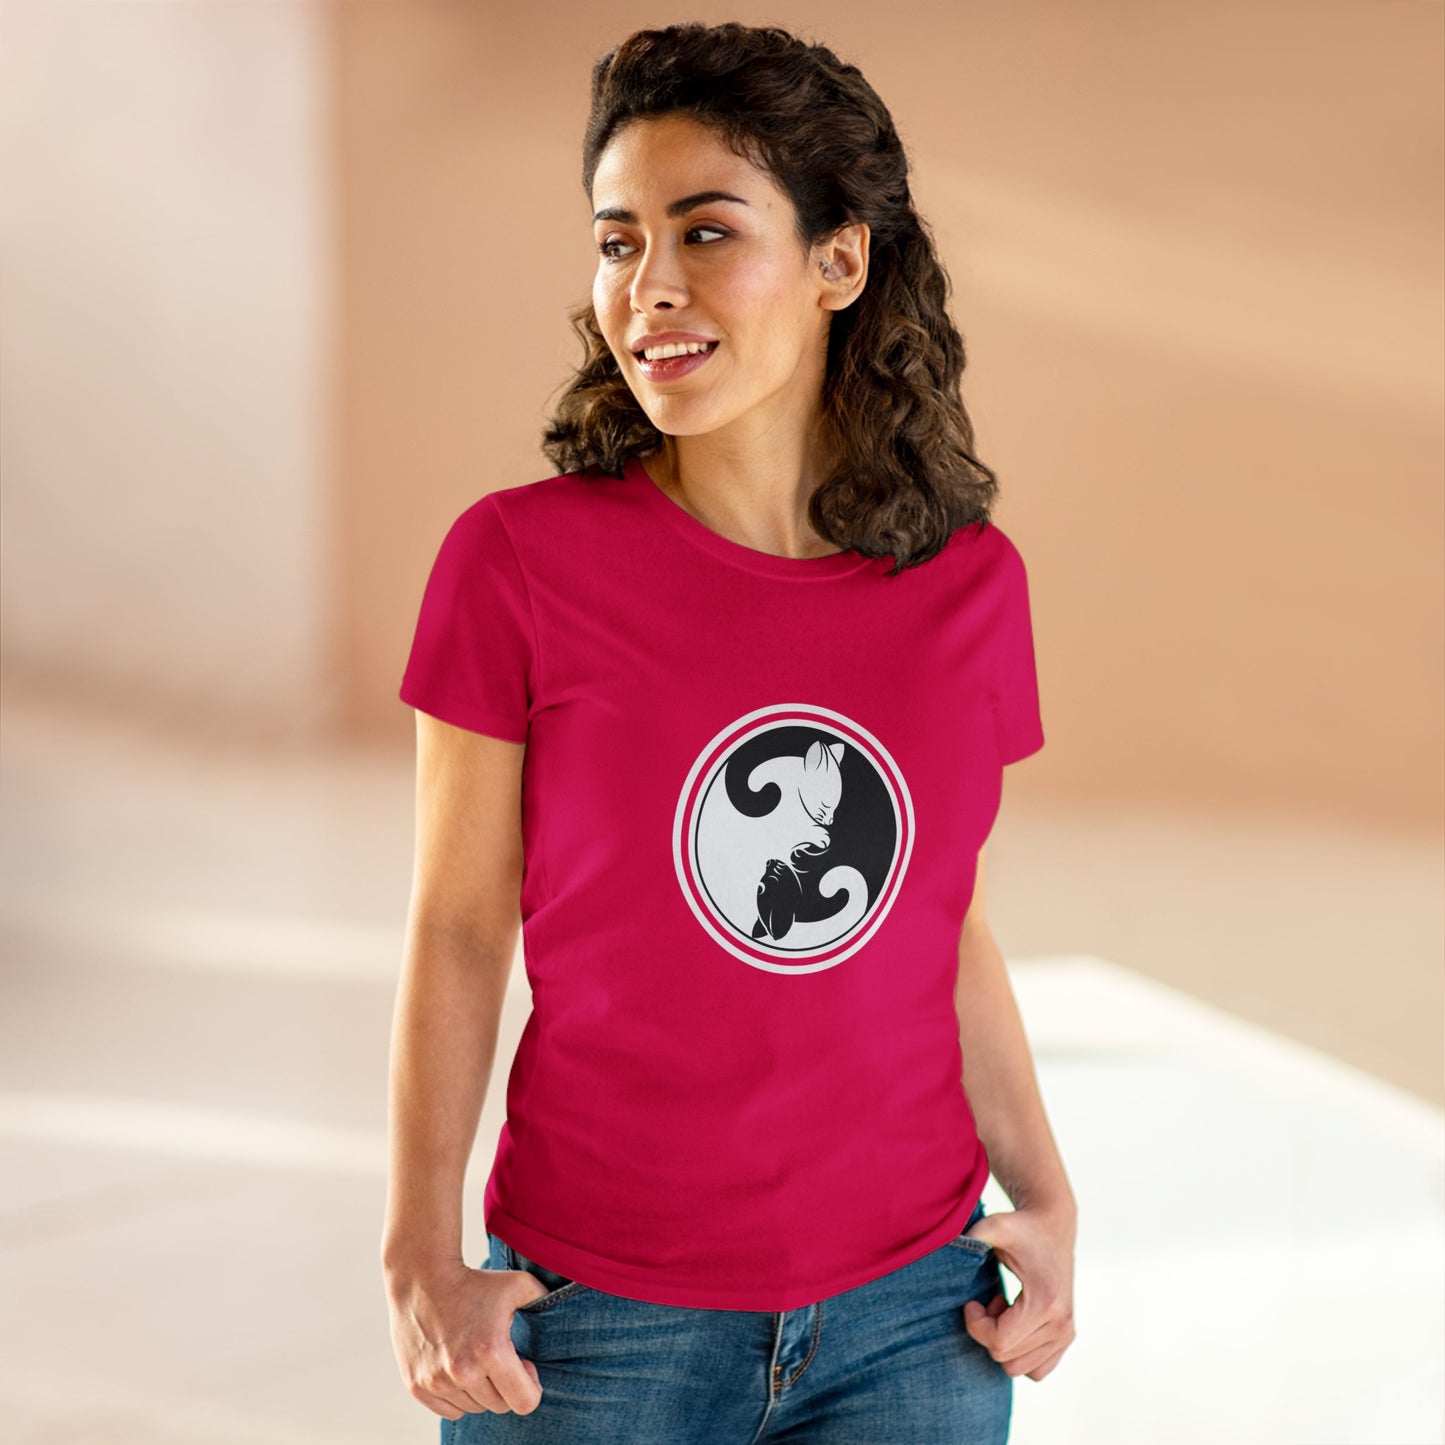 Symbol, Ying Yang, Cat- Adult, Semi-fitted, Smaller Size Image, T-shirt